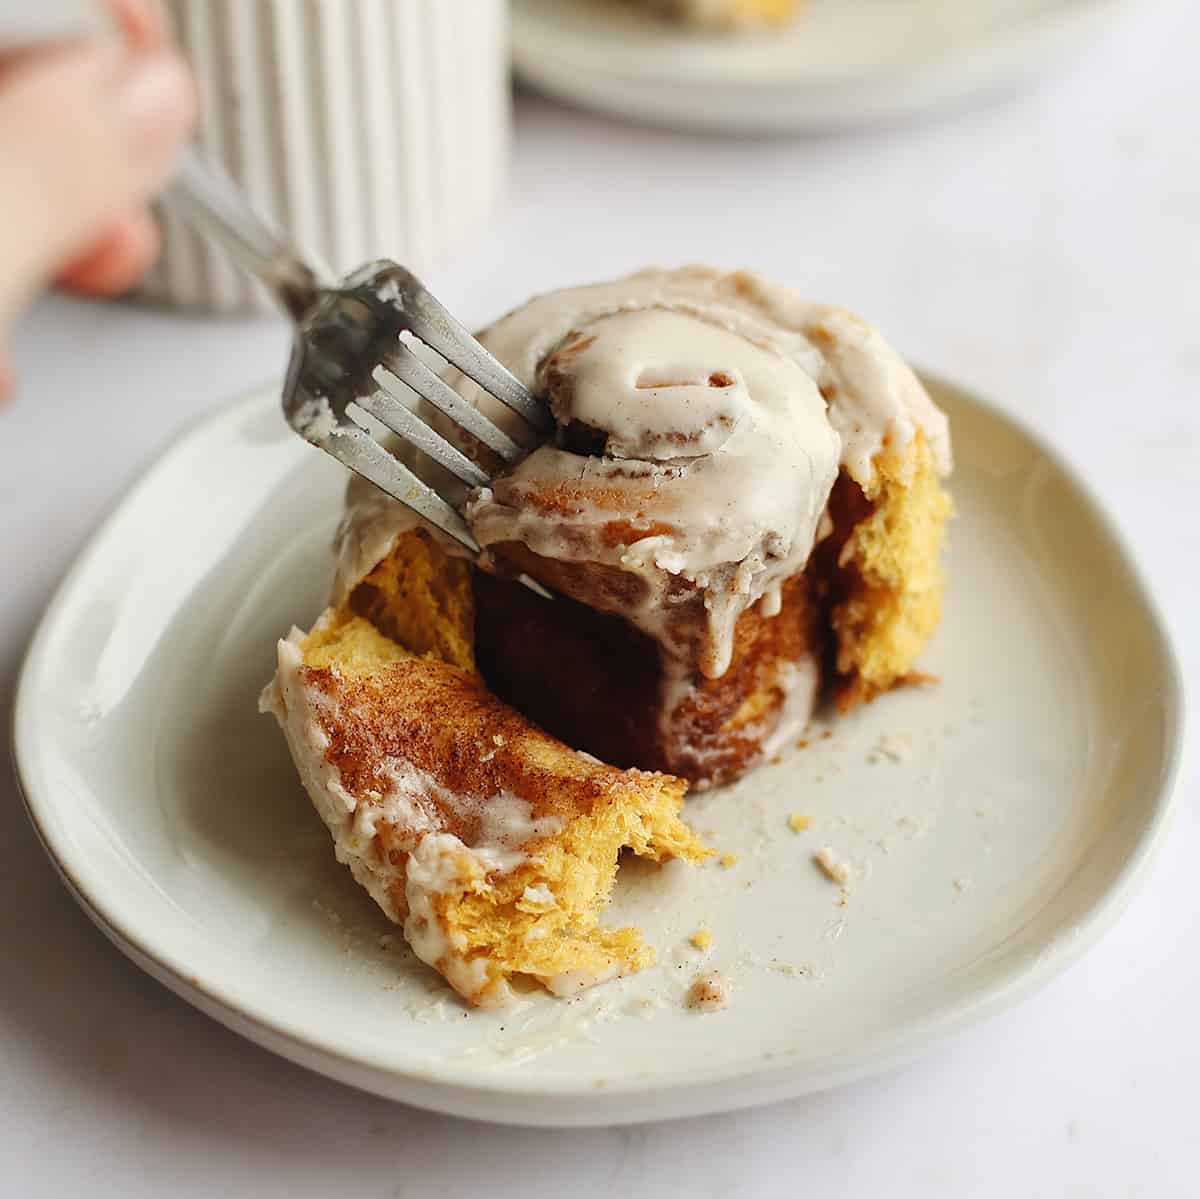 a fork taking a bite out of a Pumpkin Cinnamon Roll on a plate